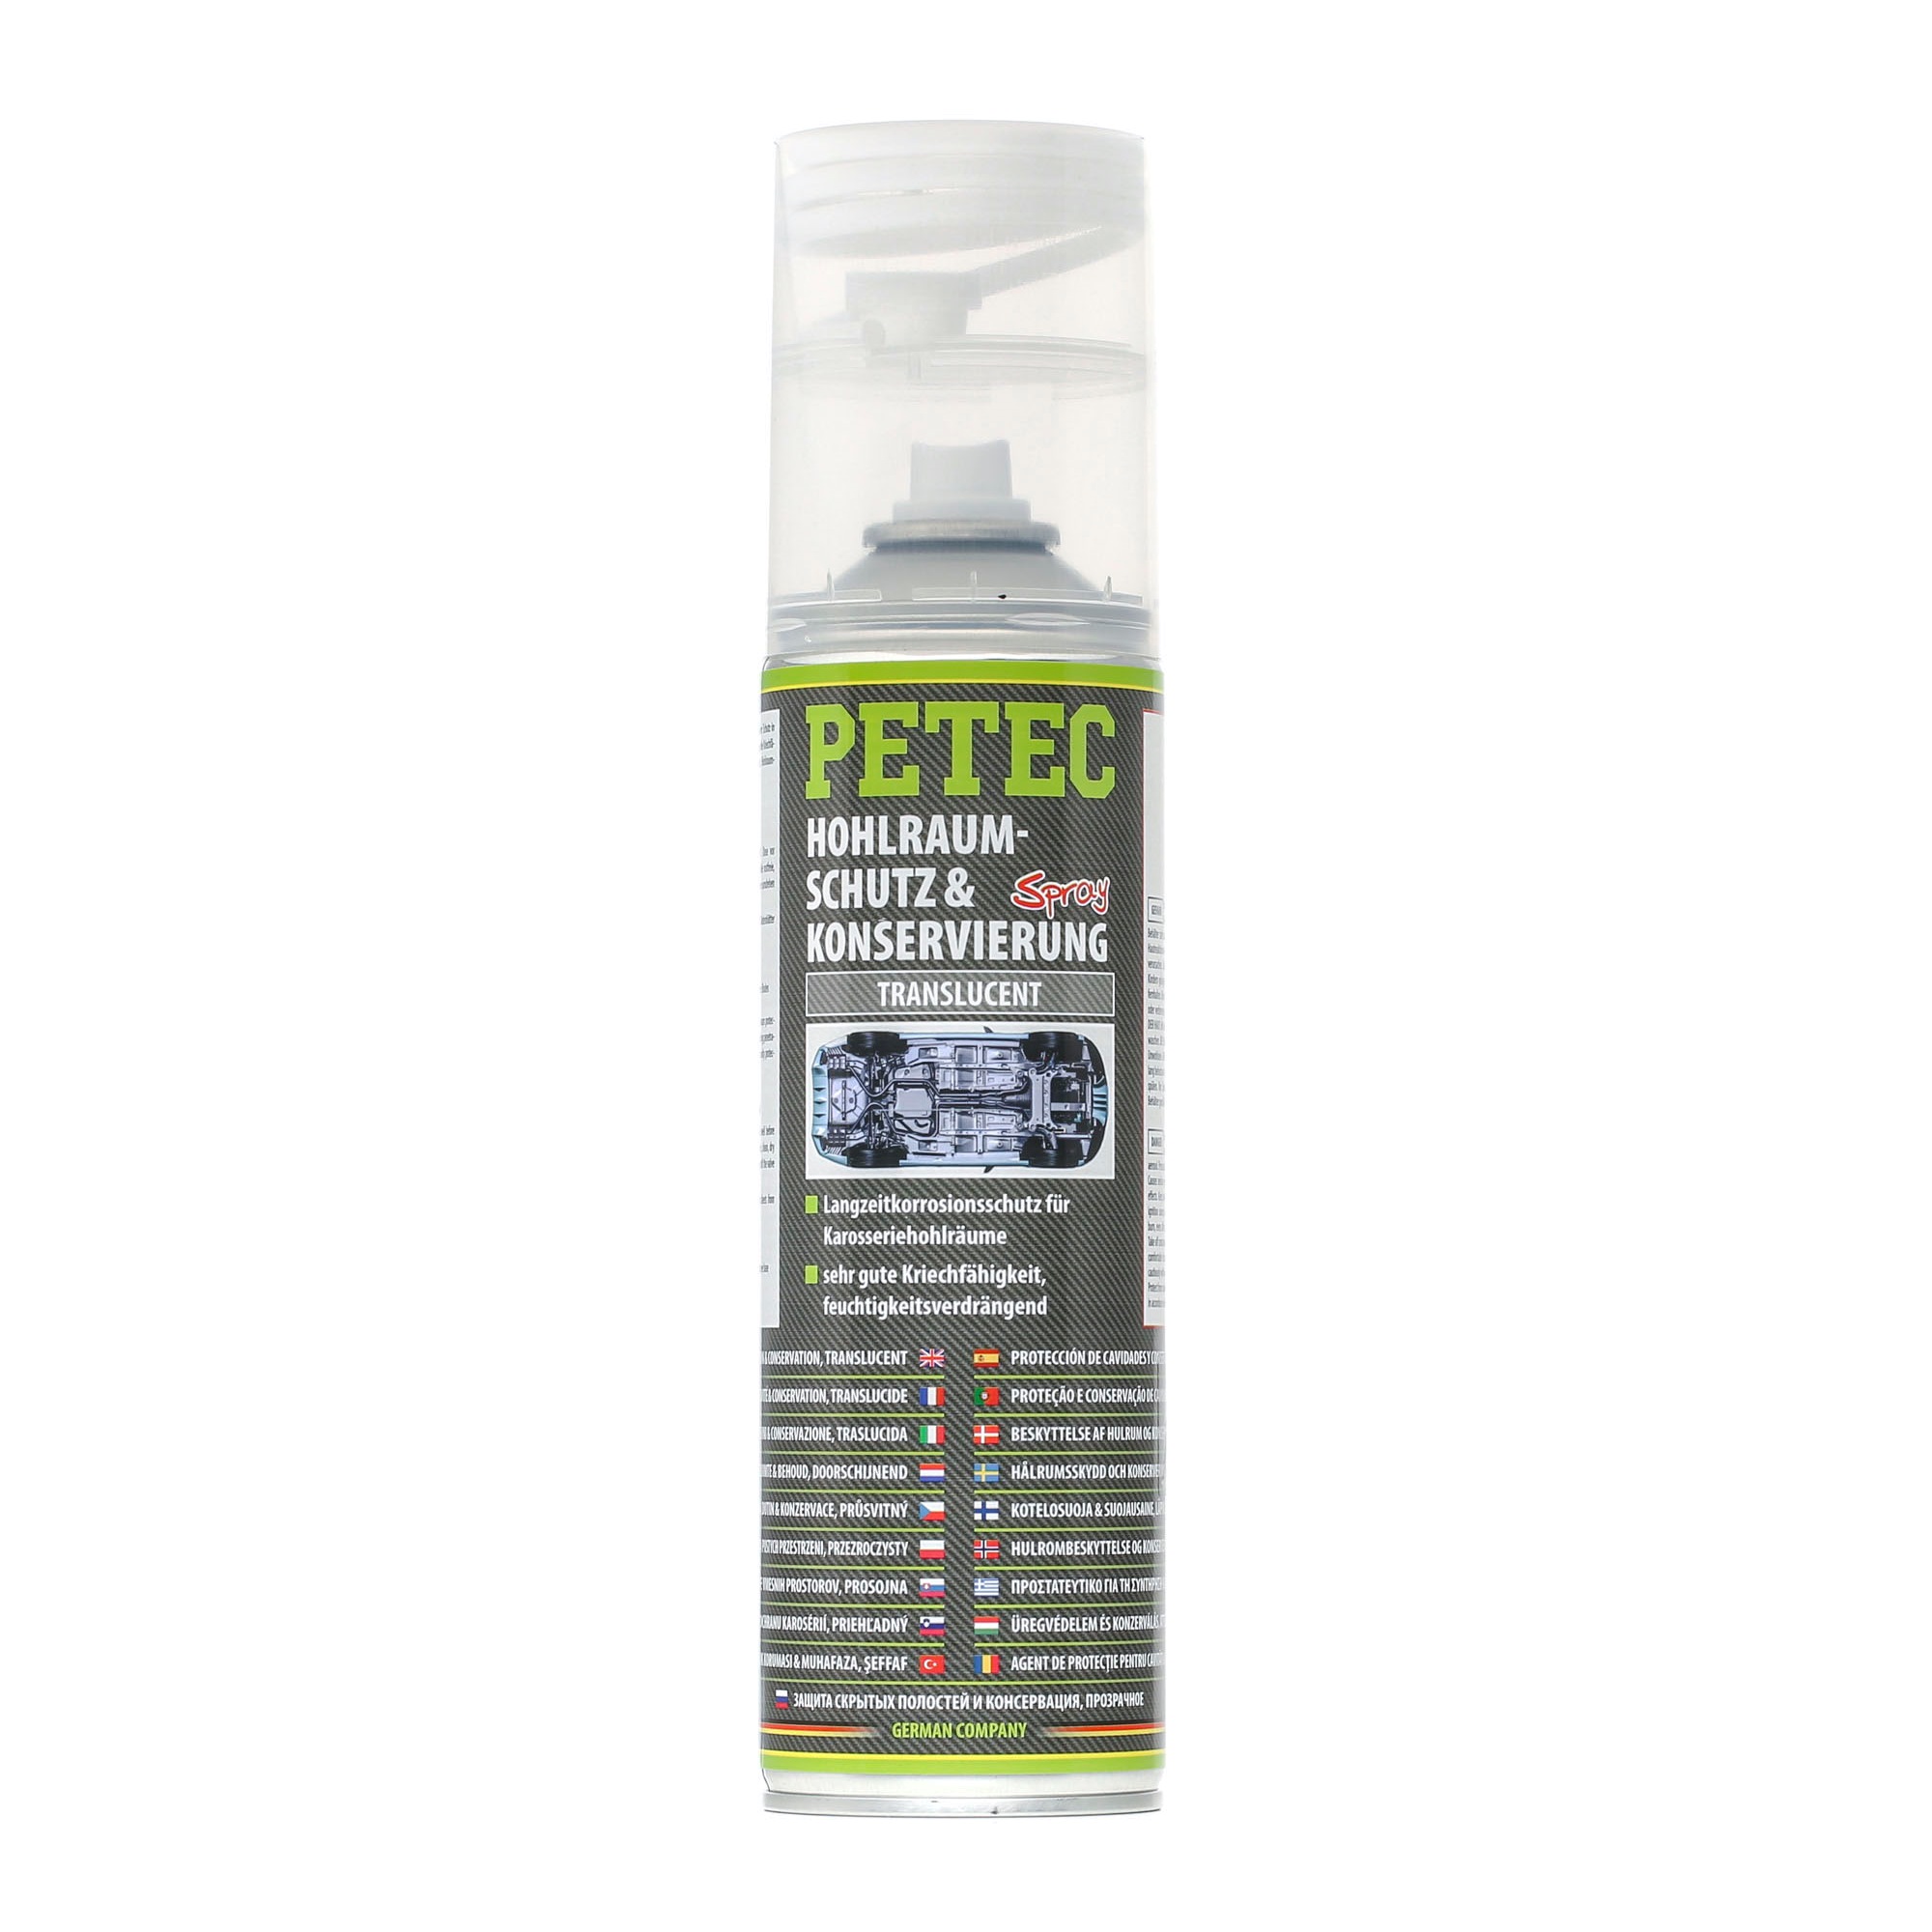 PETEC 73550 Undercoating aerosol, 500ml, Long-term Protection, high corrosion protection, Plastic, Penetrable, Road Salt Resistant, Heat-resistant, Water-repellent, not over-paintable, white-transparent